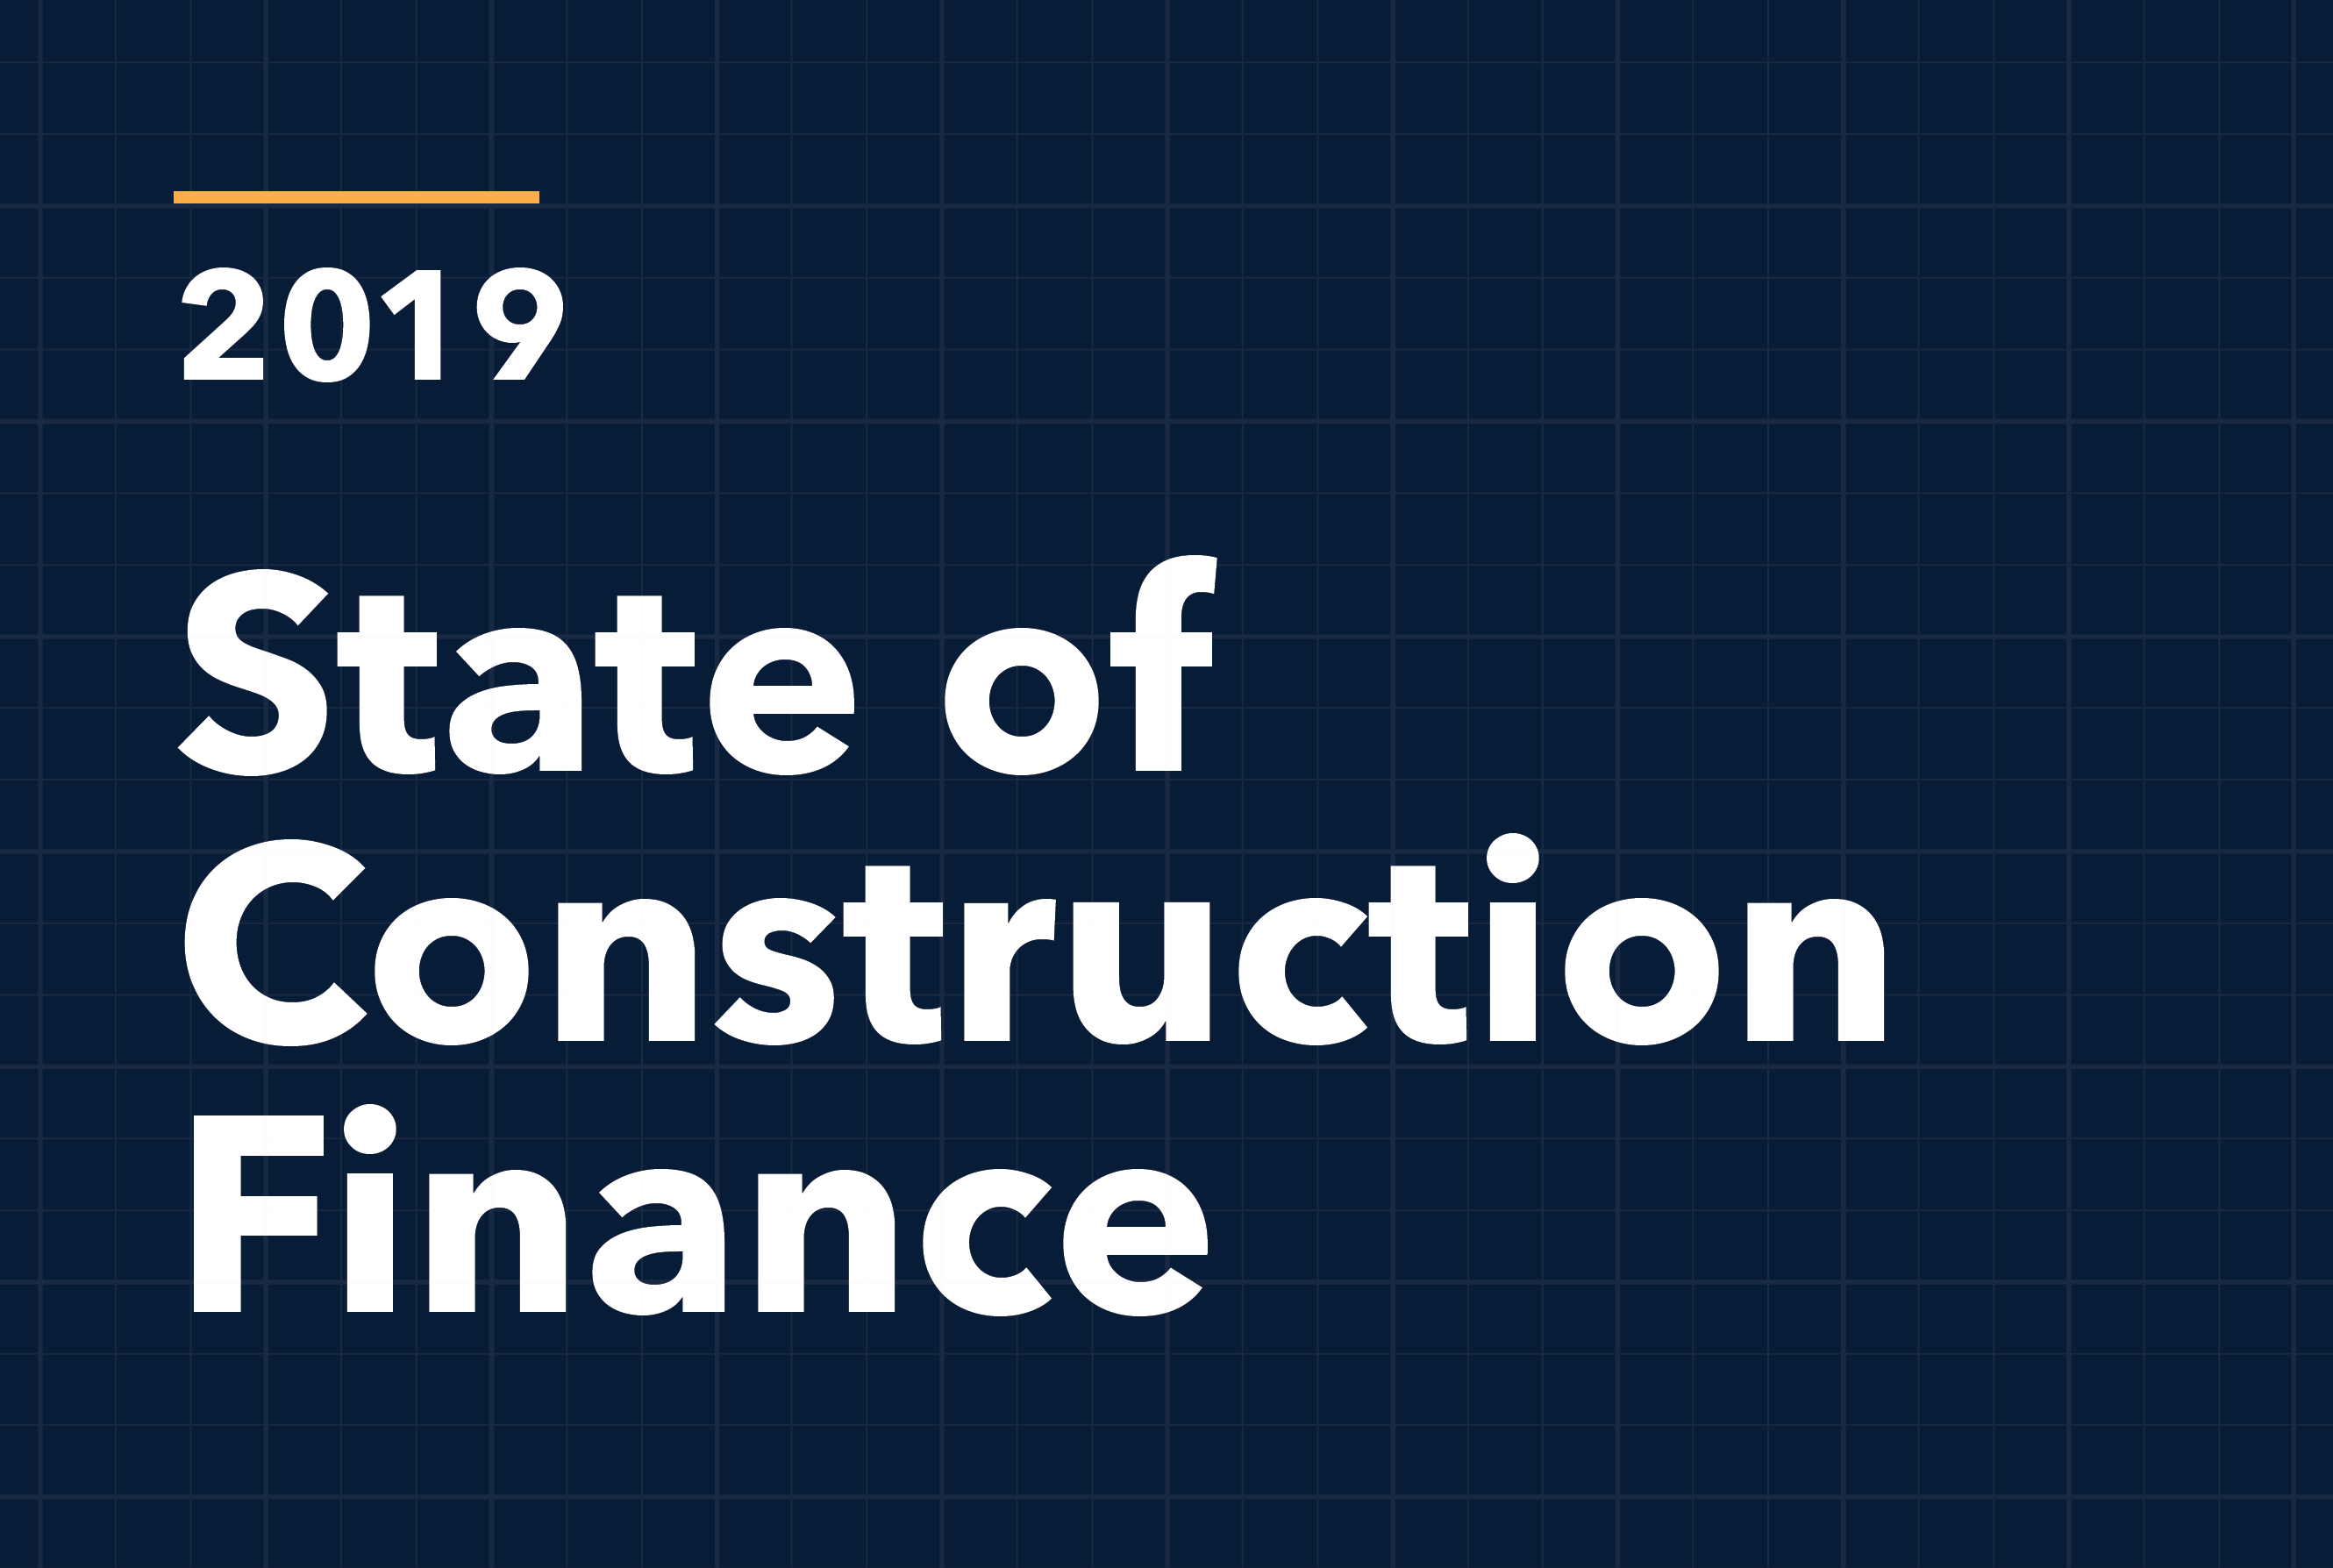 2019 State of Construction Finance Report